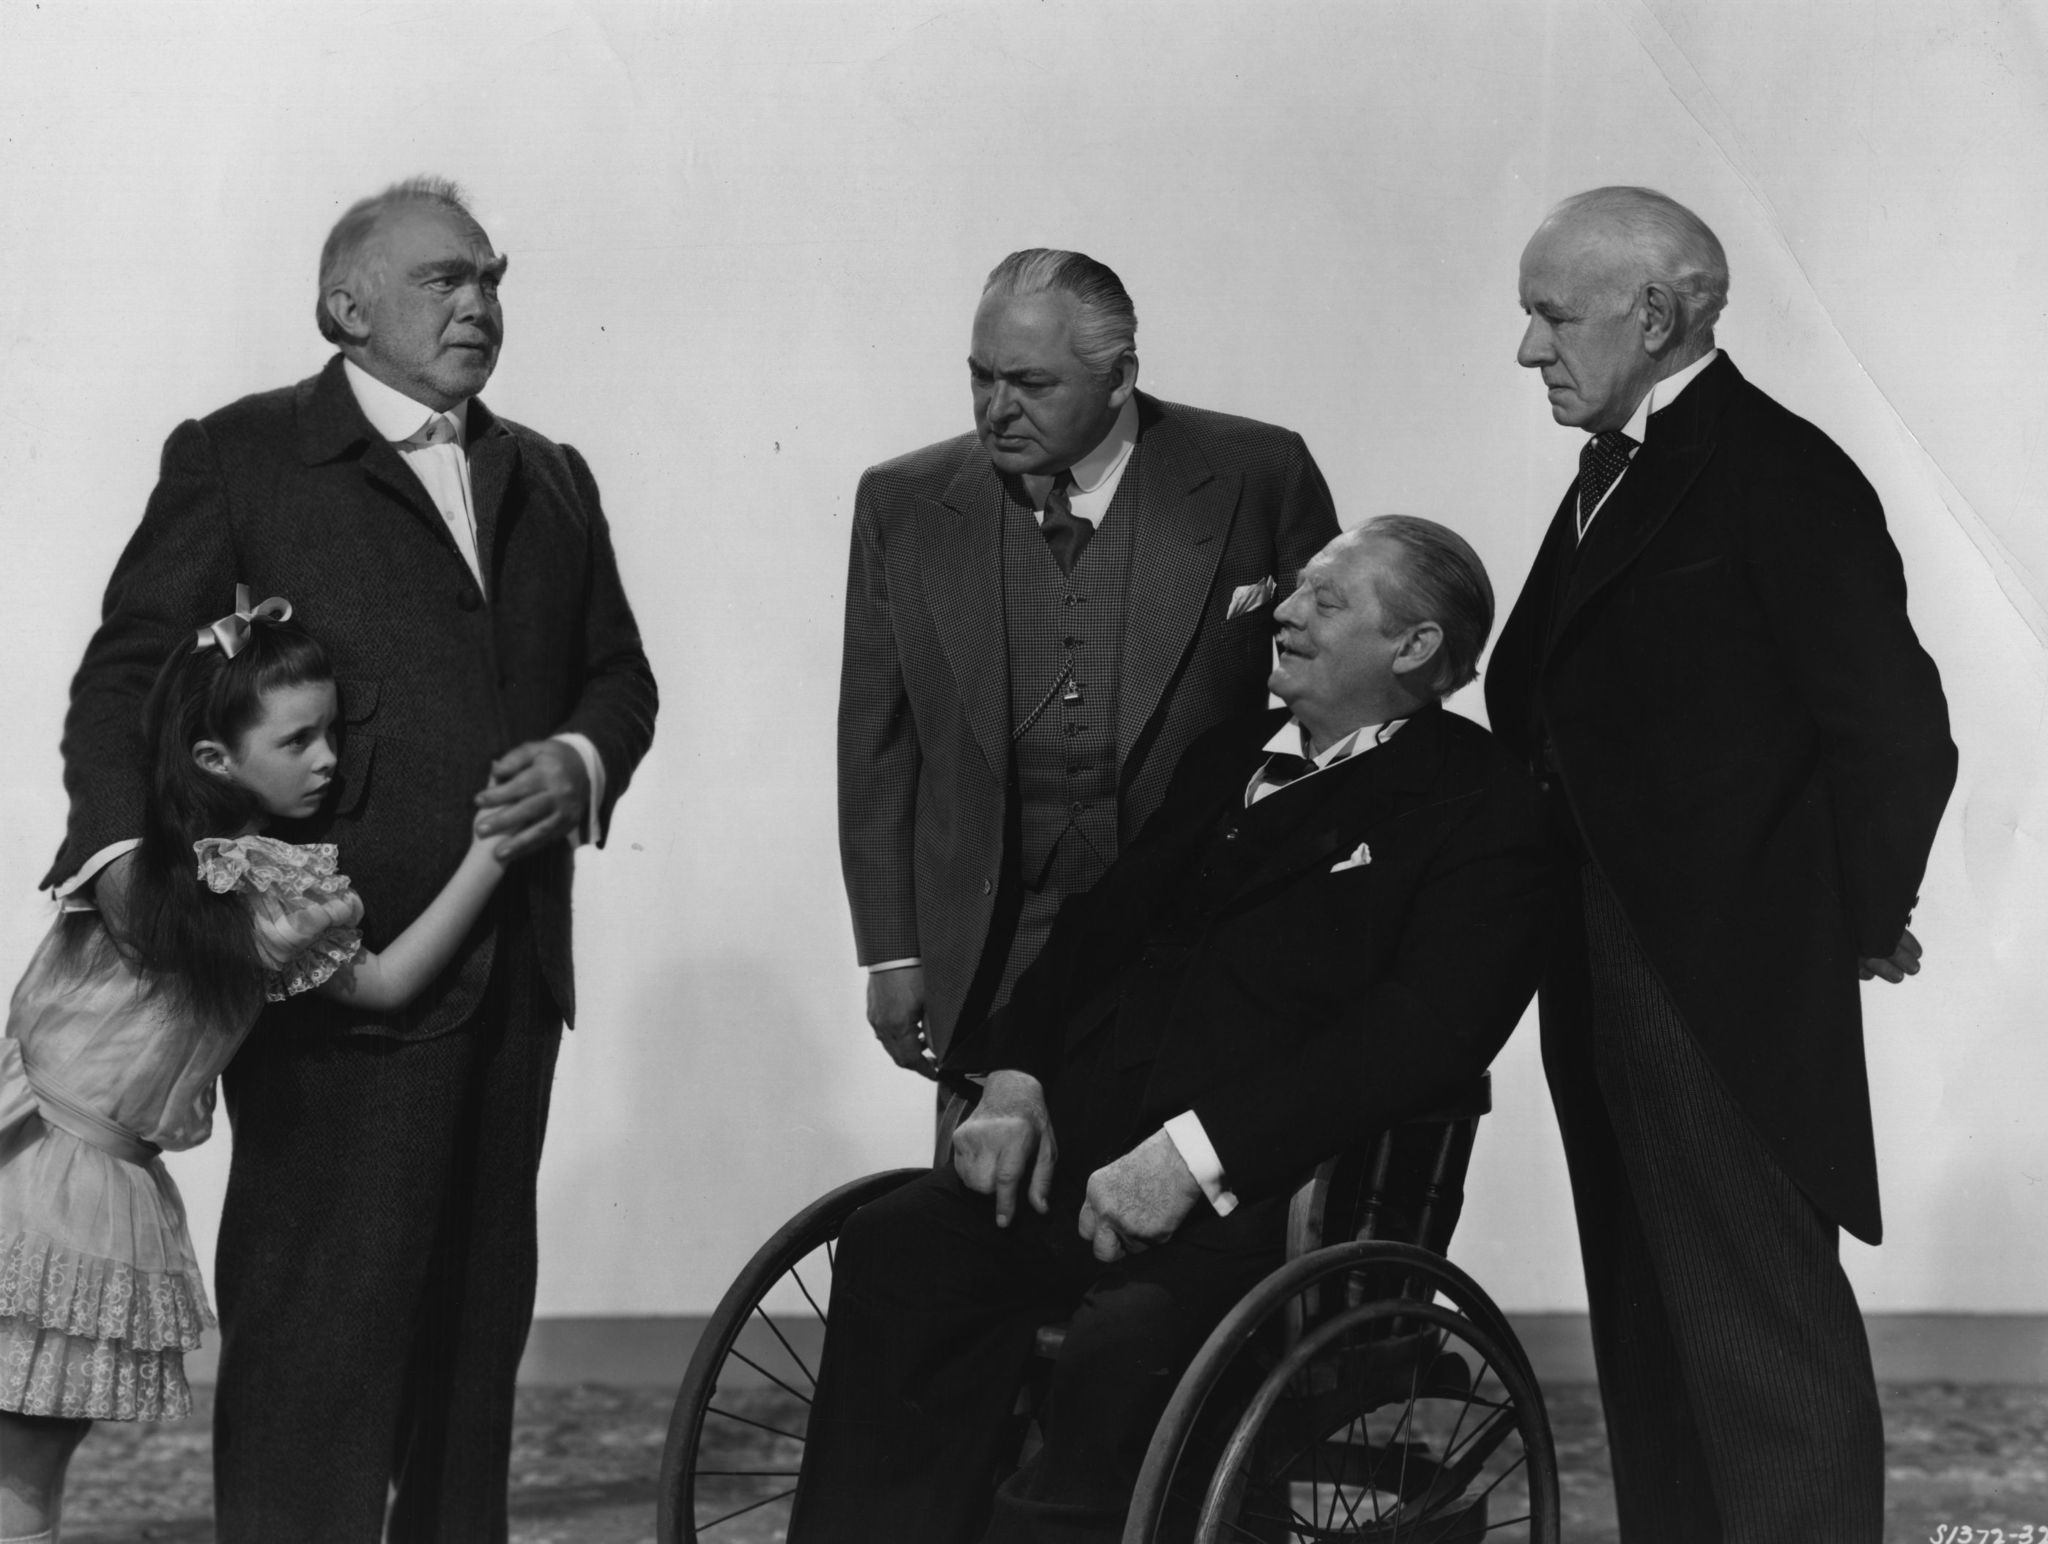 Lionel Barrymore, Edward Arnold, Thomas Mitchell and Lewis Stone